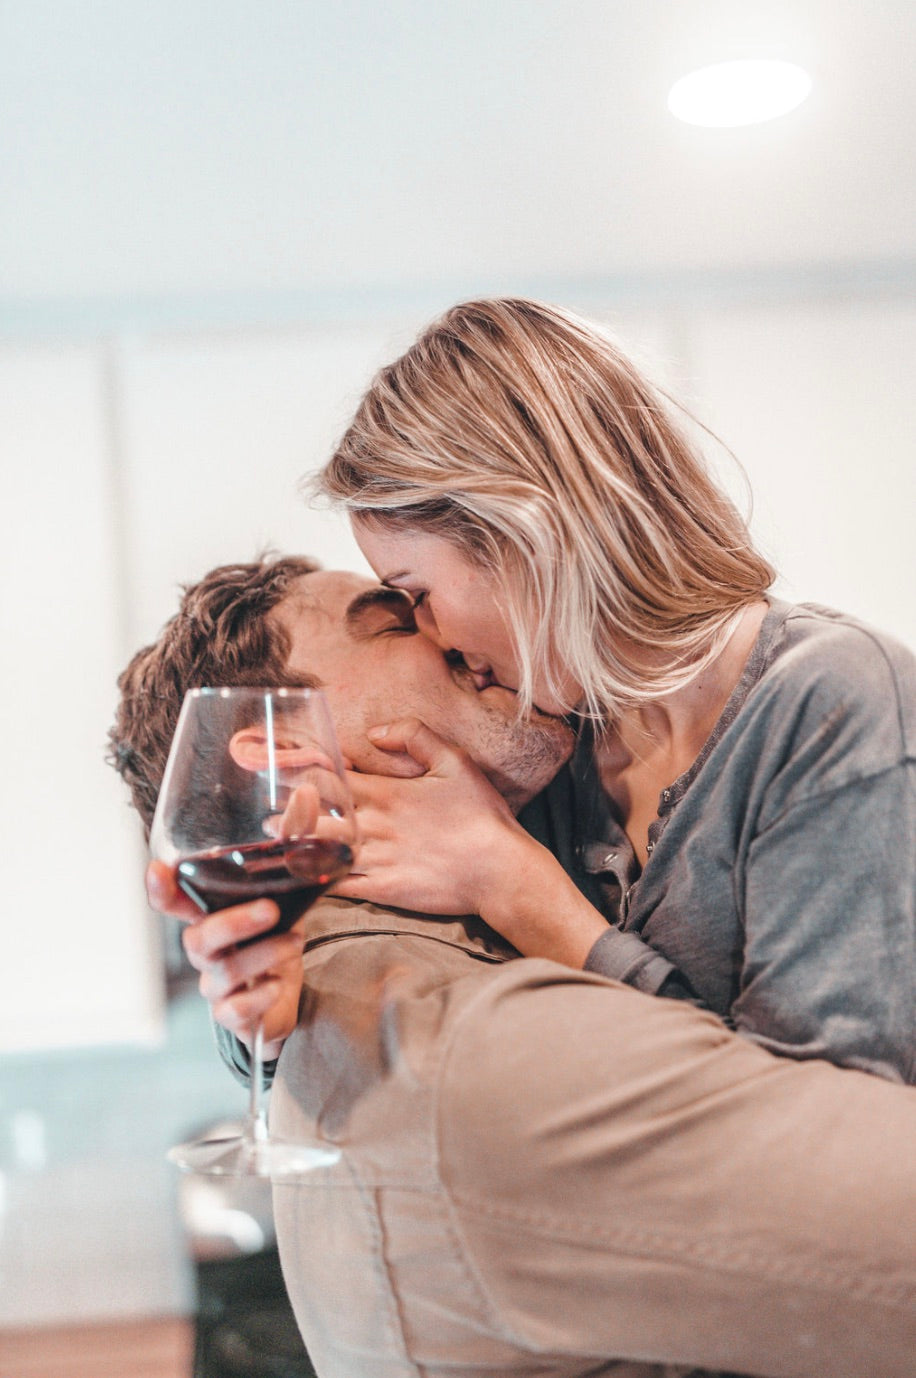 How to bring back the spark in a relationship; Couple sharing a kiss as the girl holds a glass of wine